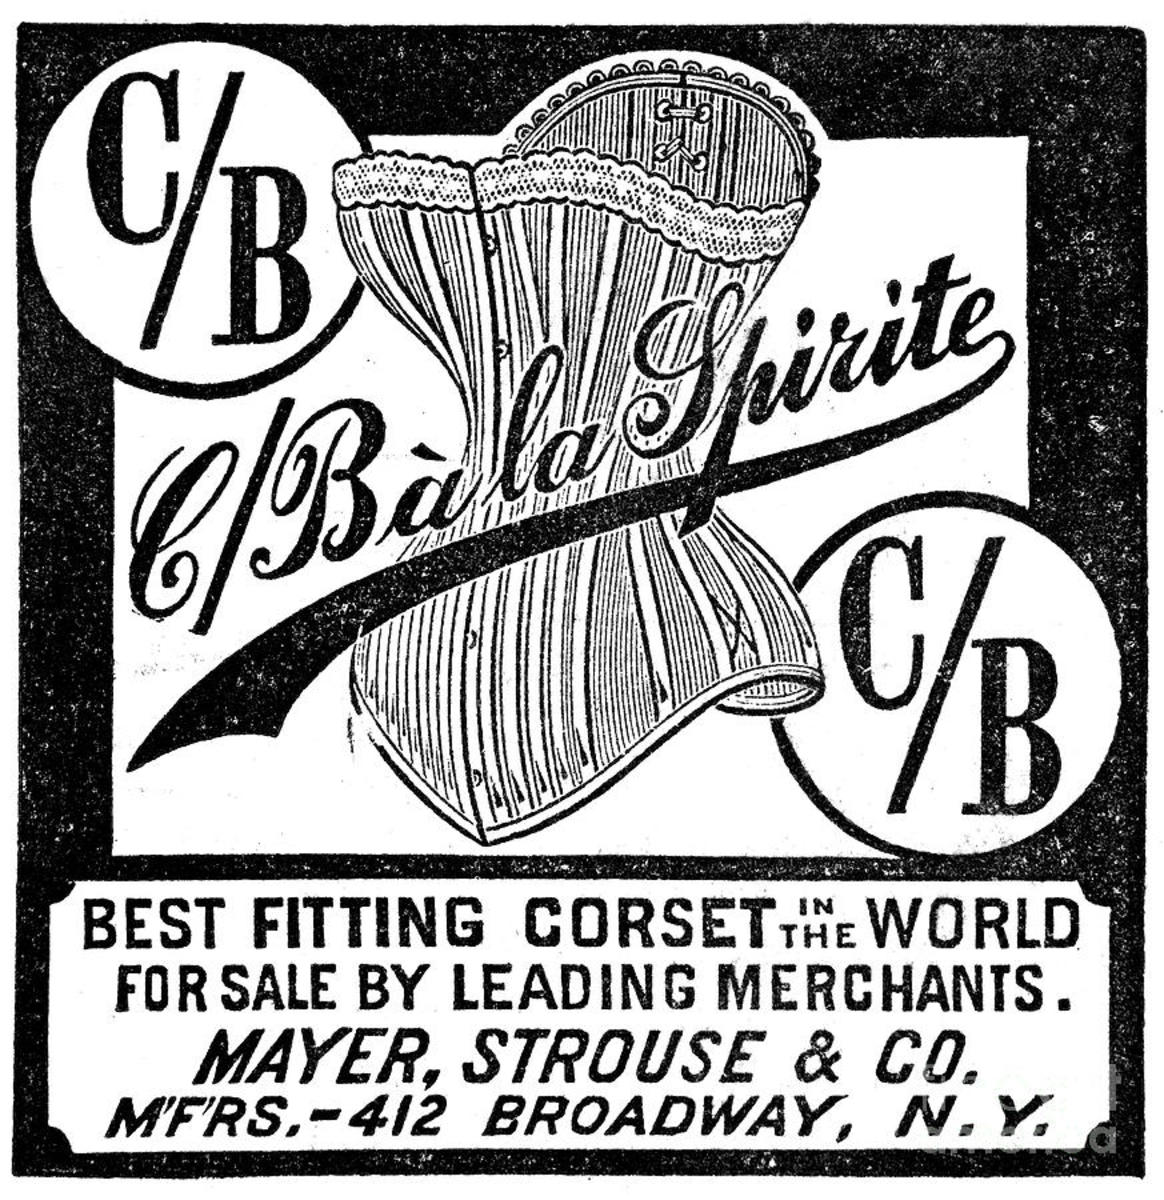 A corset ad from the 18th century. 